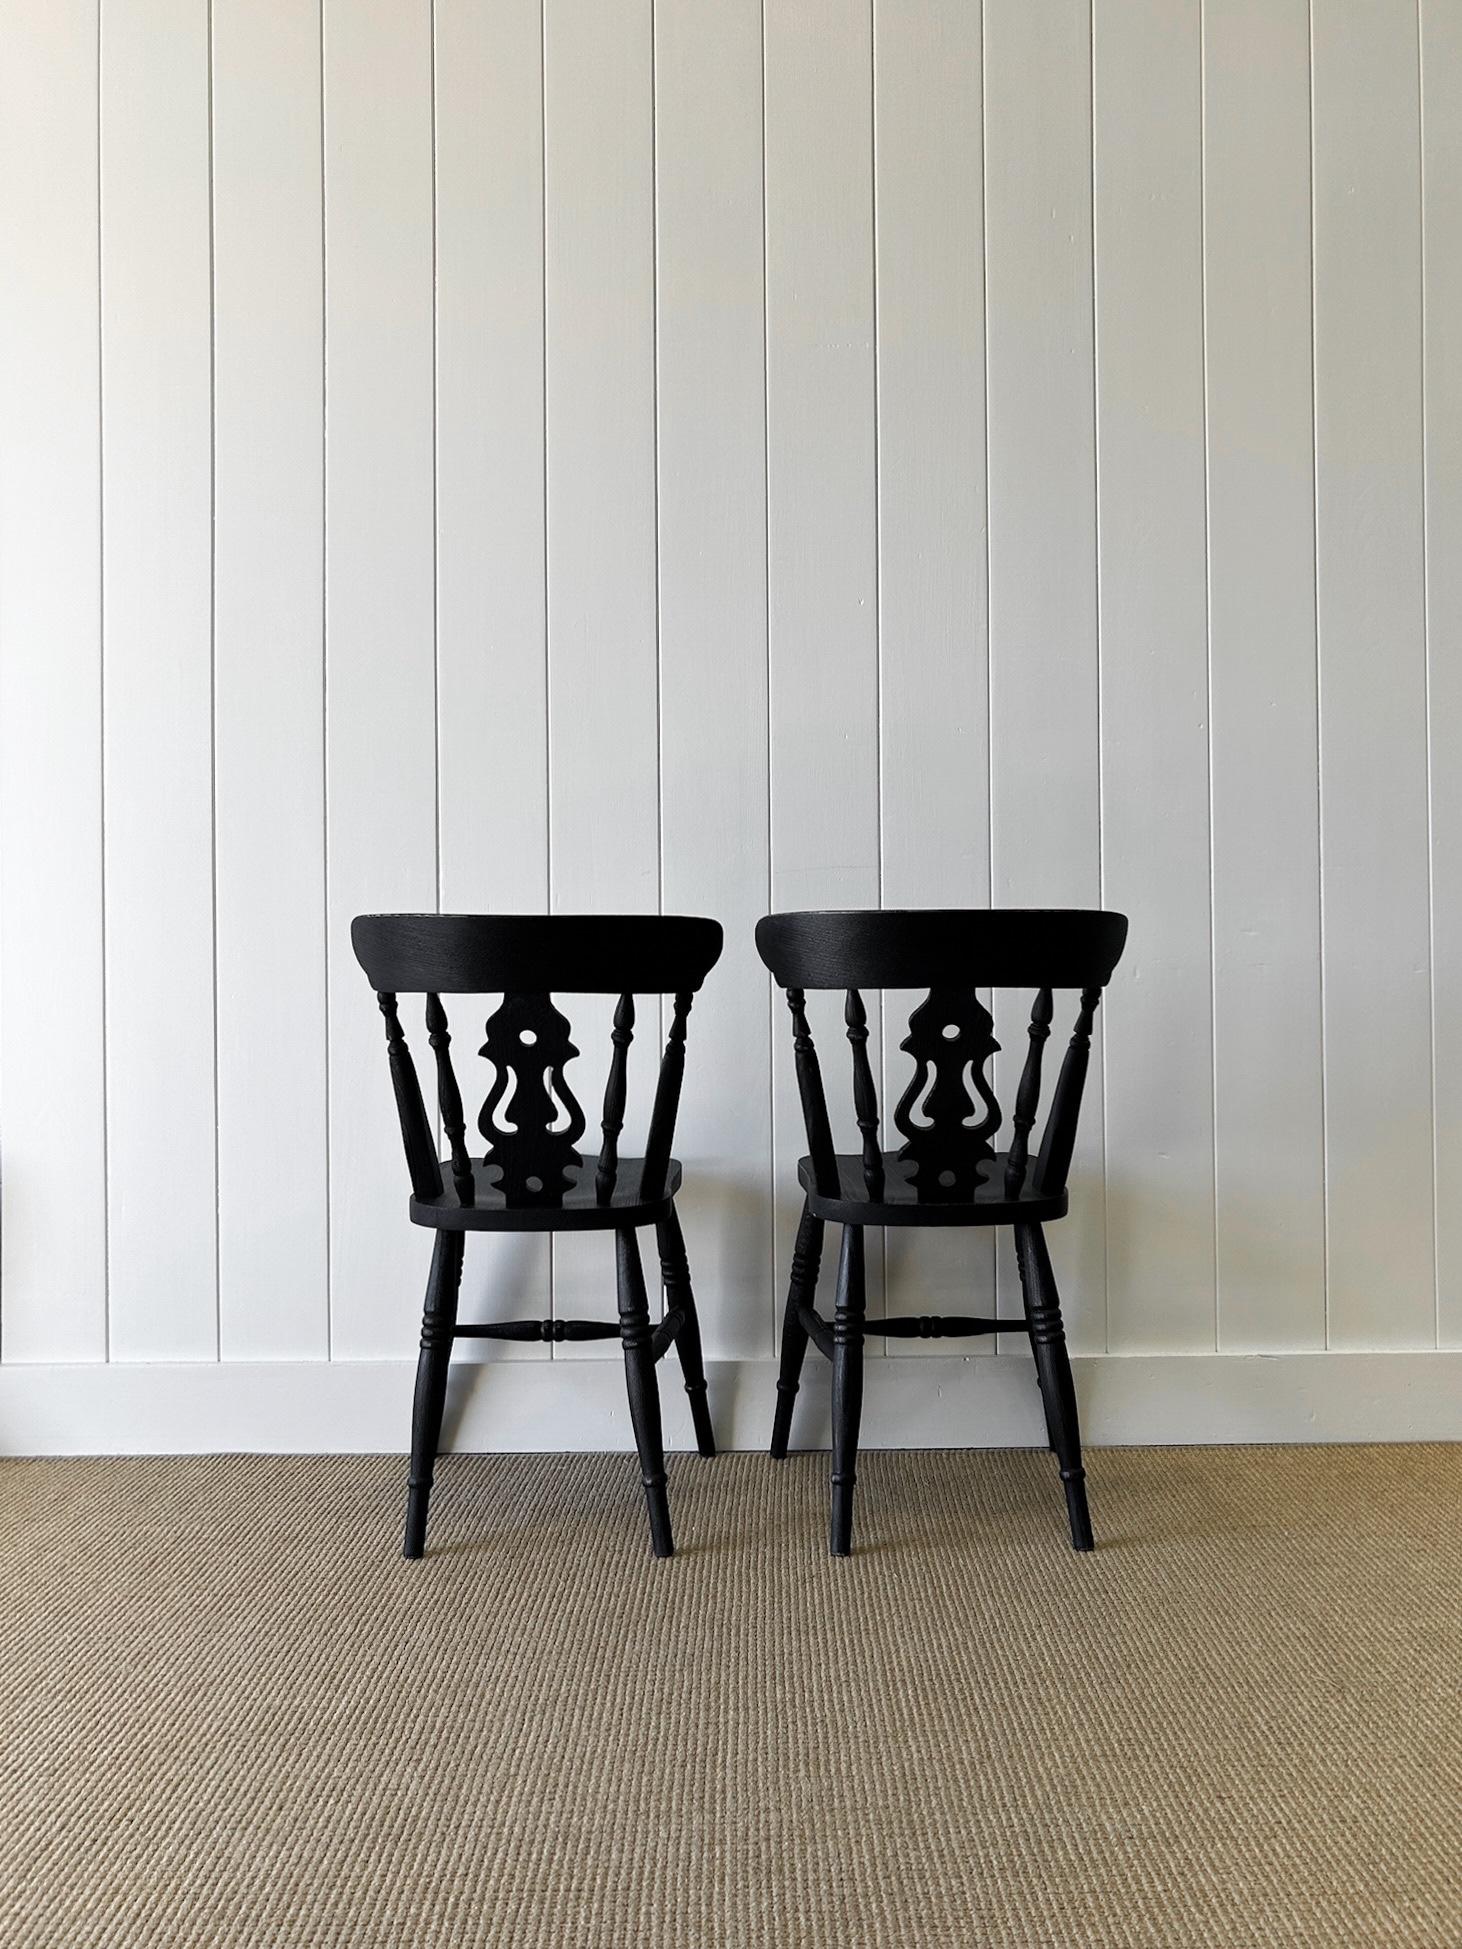 A Vintage Set of 6 Fiddleback Chairs Painted Black For Sale 1